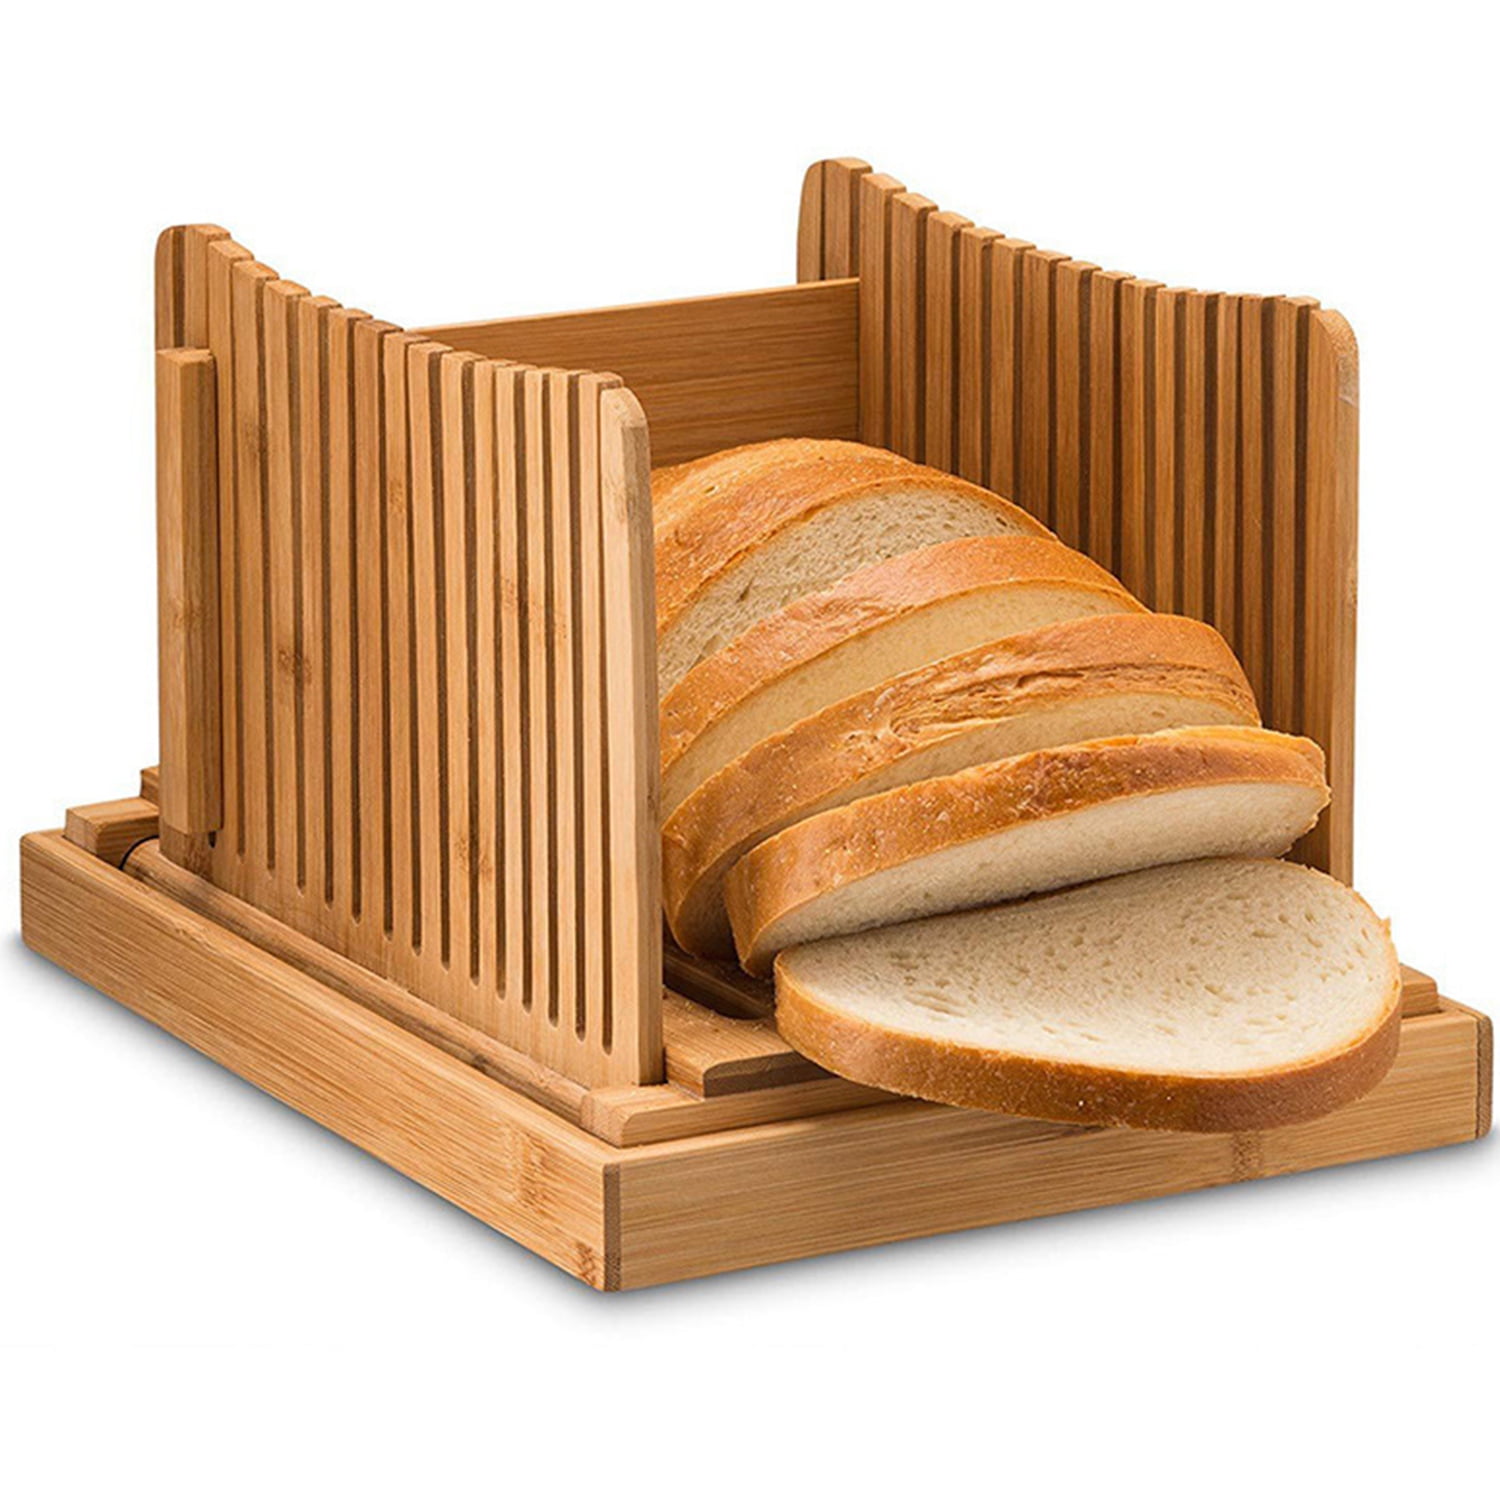 Bamboo Bread Slicer for Homemade Bread Loaf – Wooden Bread Cutting Board  with Crumble Holder – Foldable, Adjustable and Compact Loaf Cutter – Thin  or Thick Slices price in UAE,  UAE